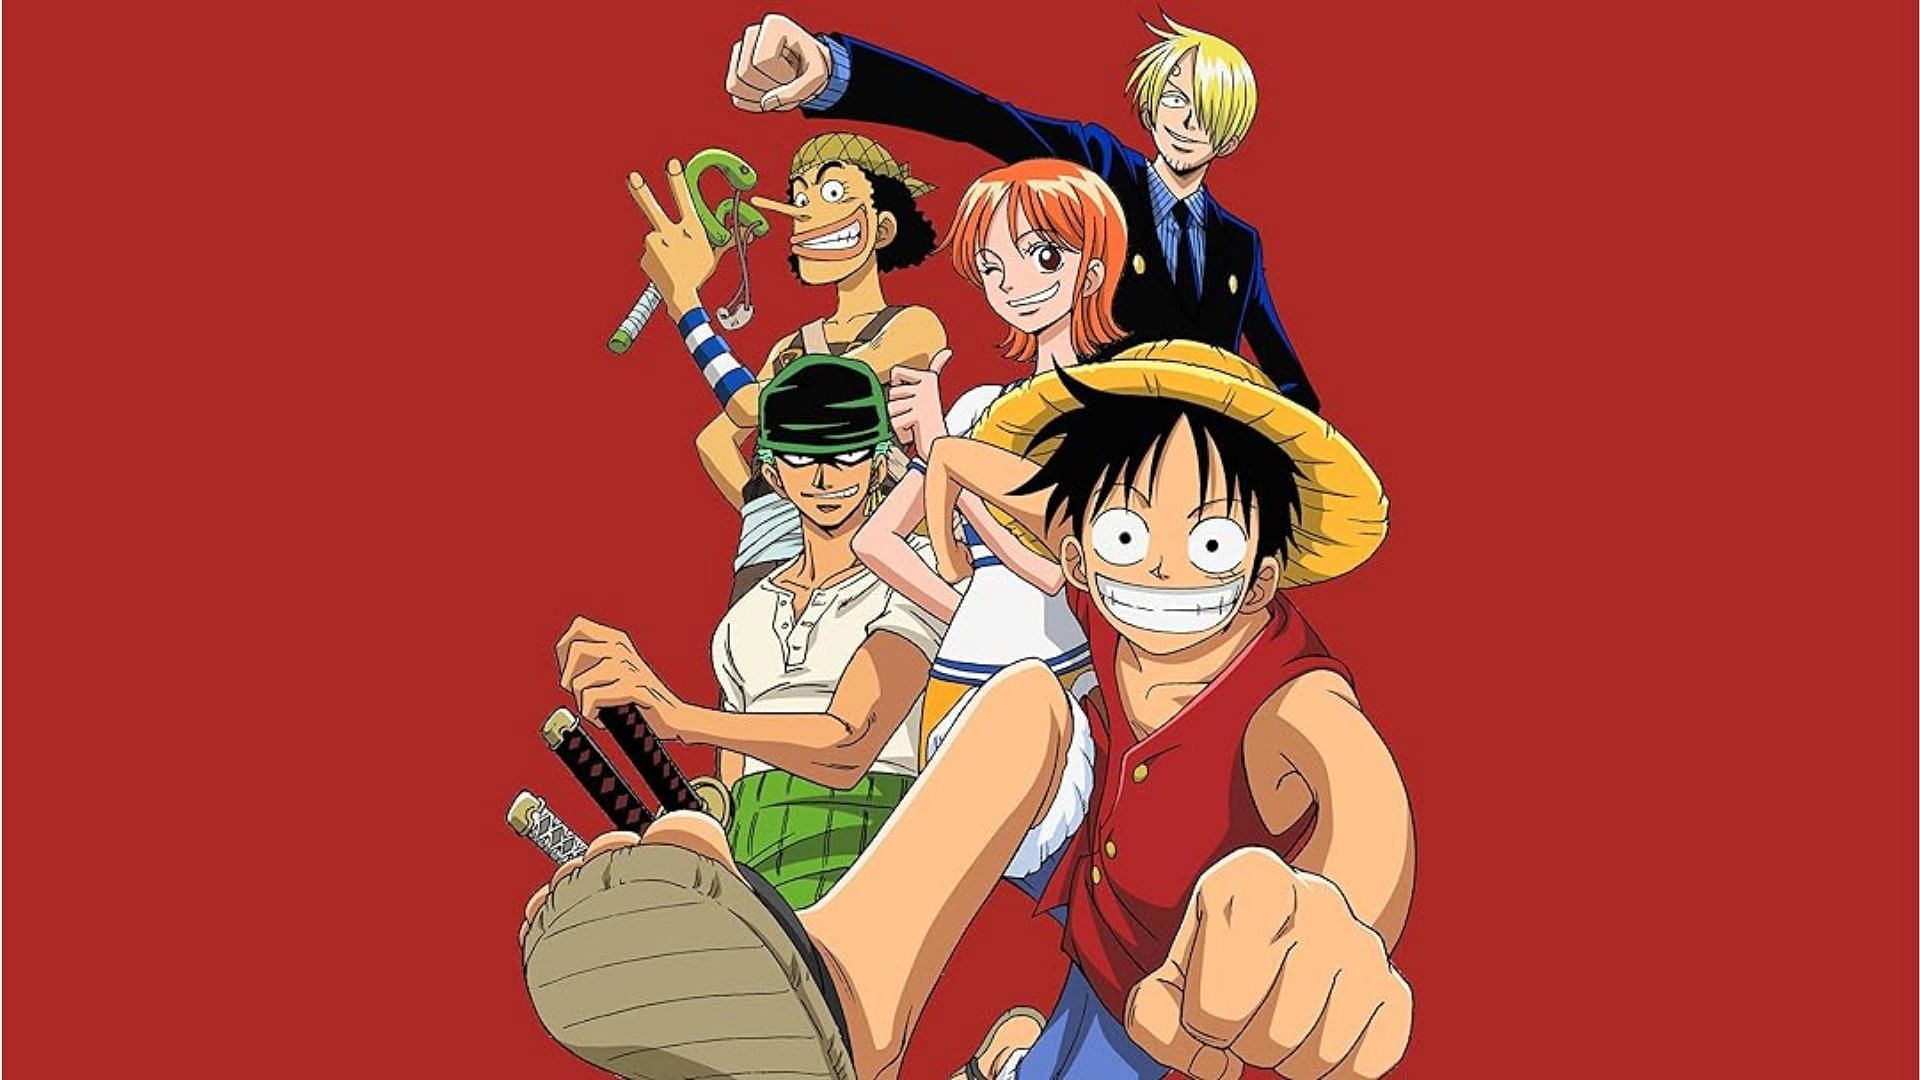 Featured image of the Straw Hat Pirates (Image via Prime Video)